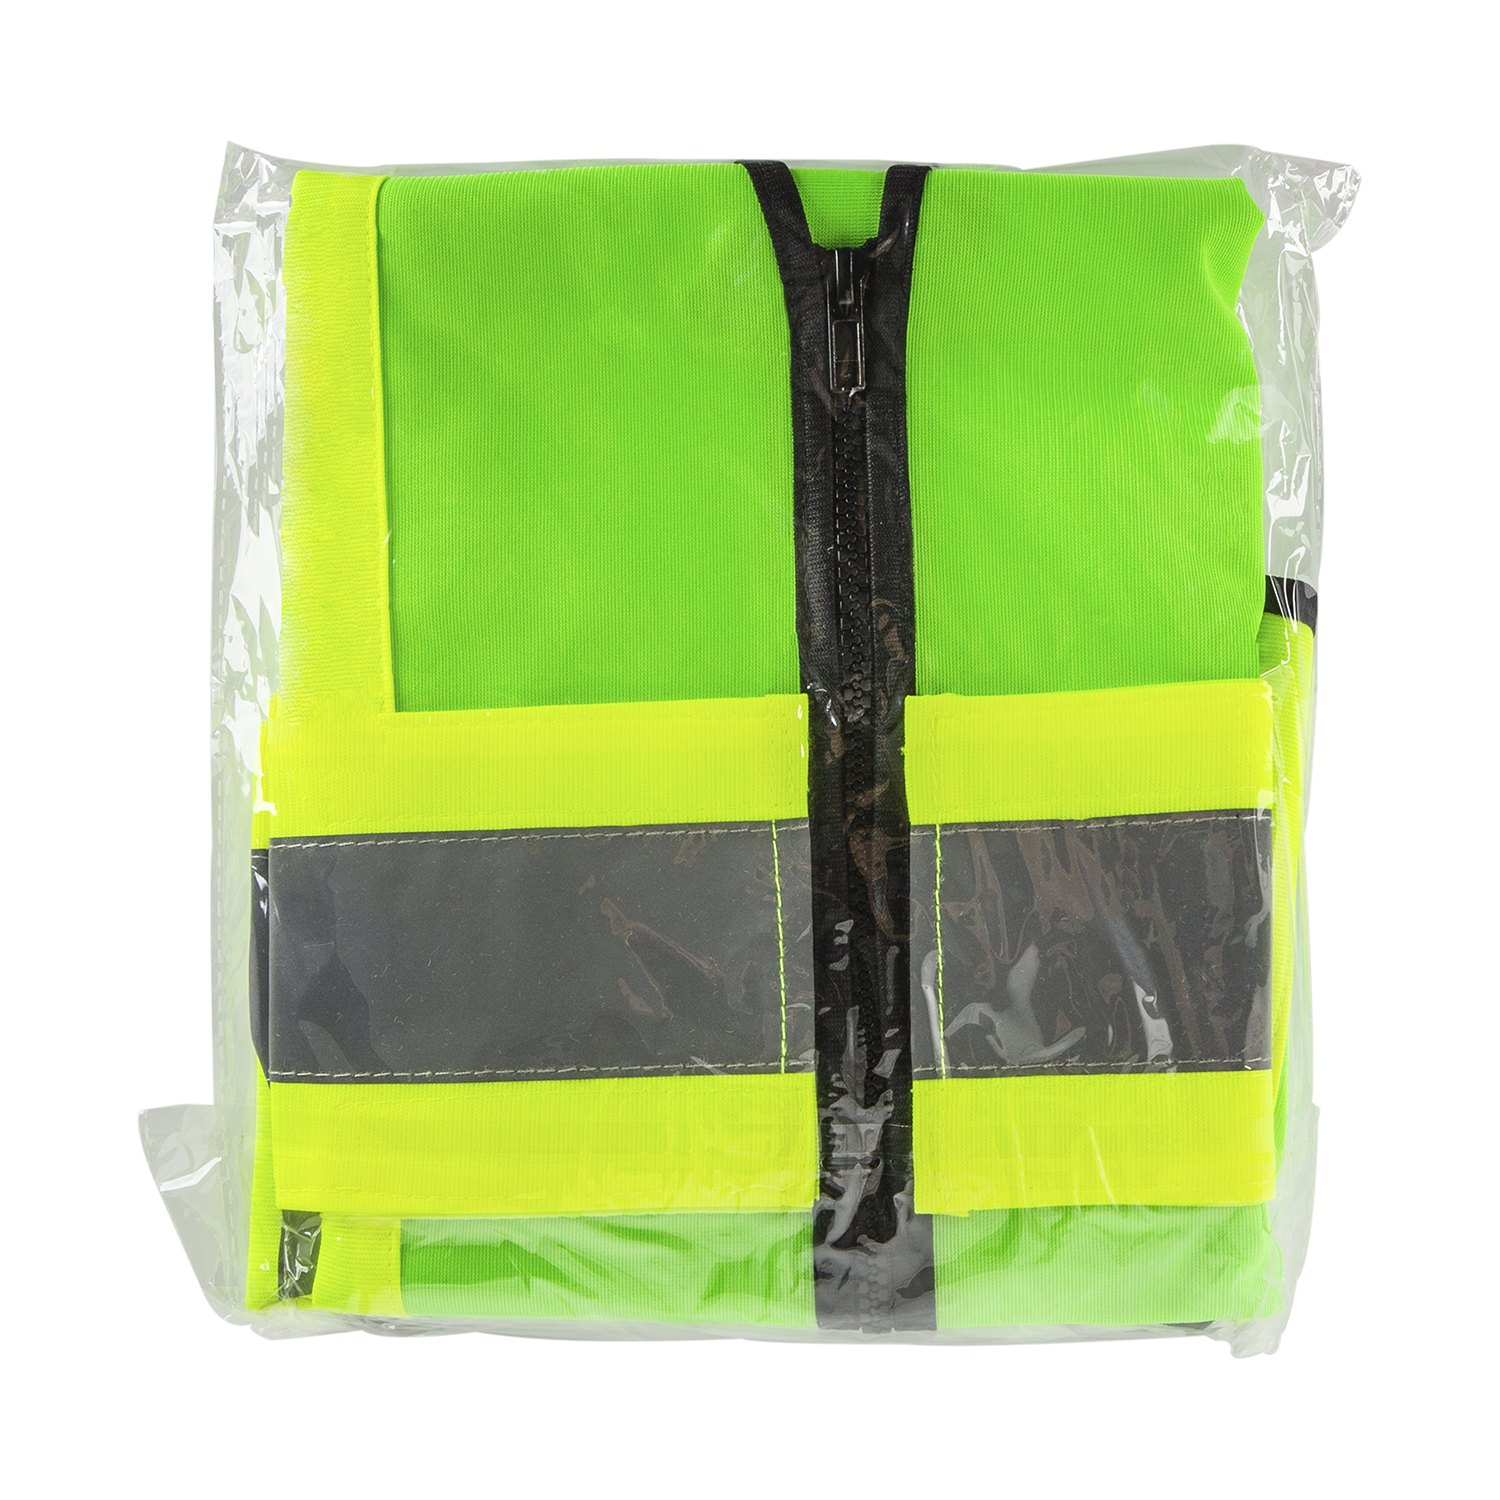 Karat High Visibility Reflective Safety Vest with Zipper Fastening (Green), Large - 1 pc